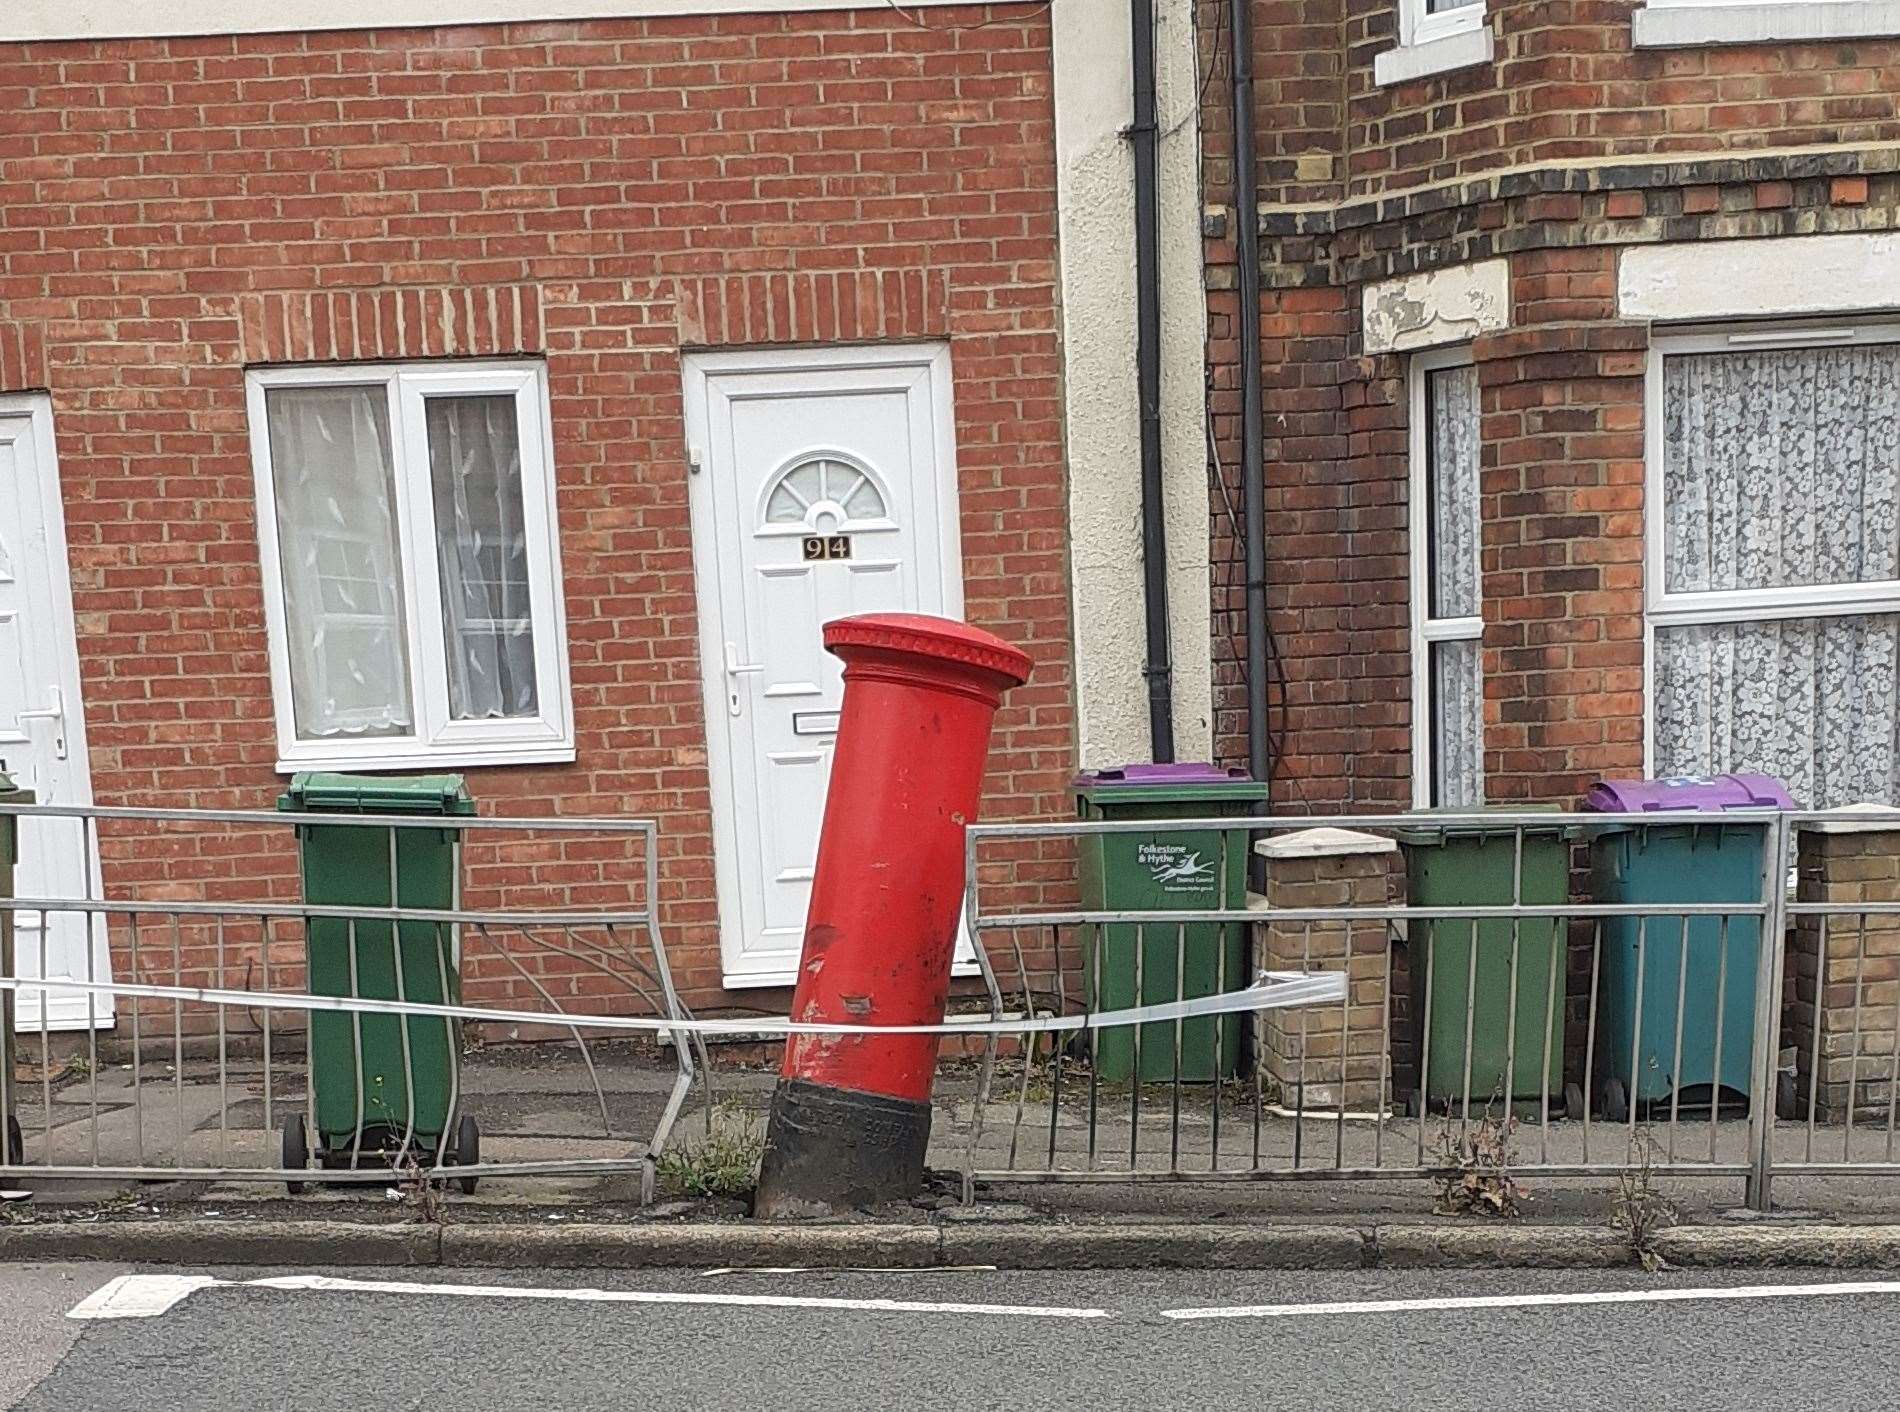 It appears the postbox was hit by a car